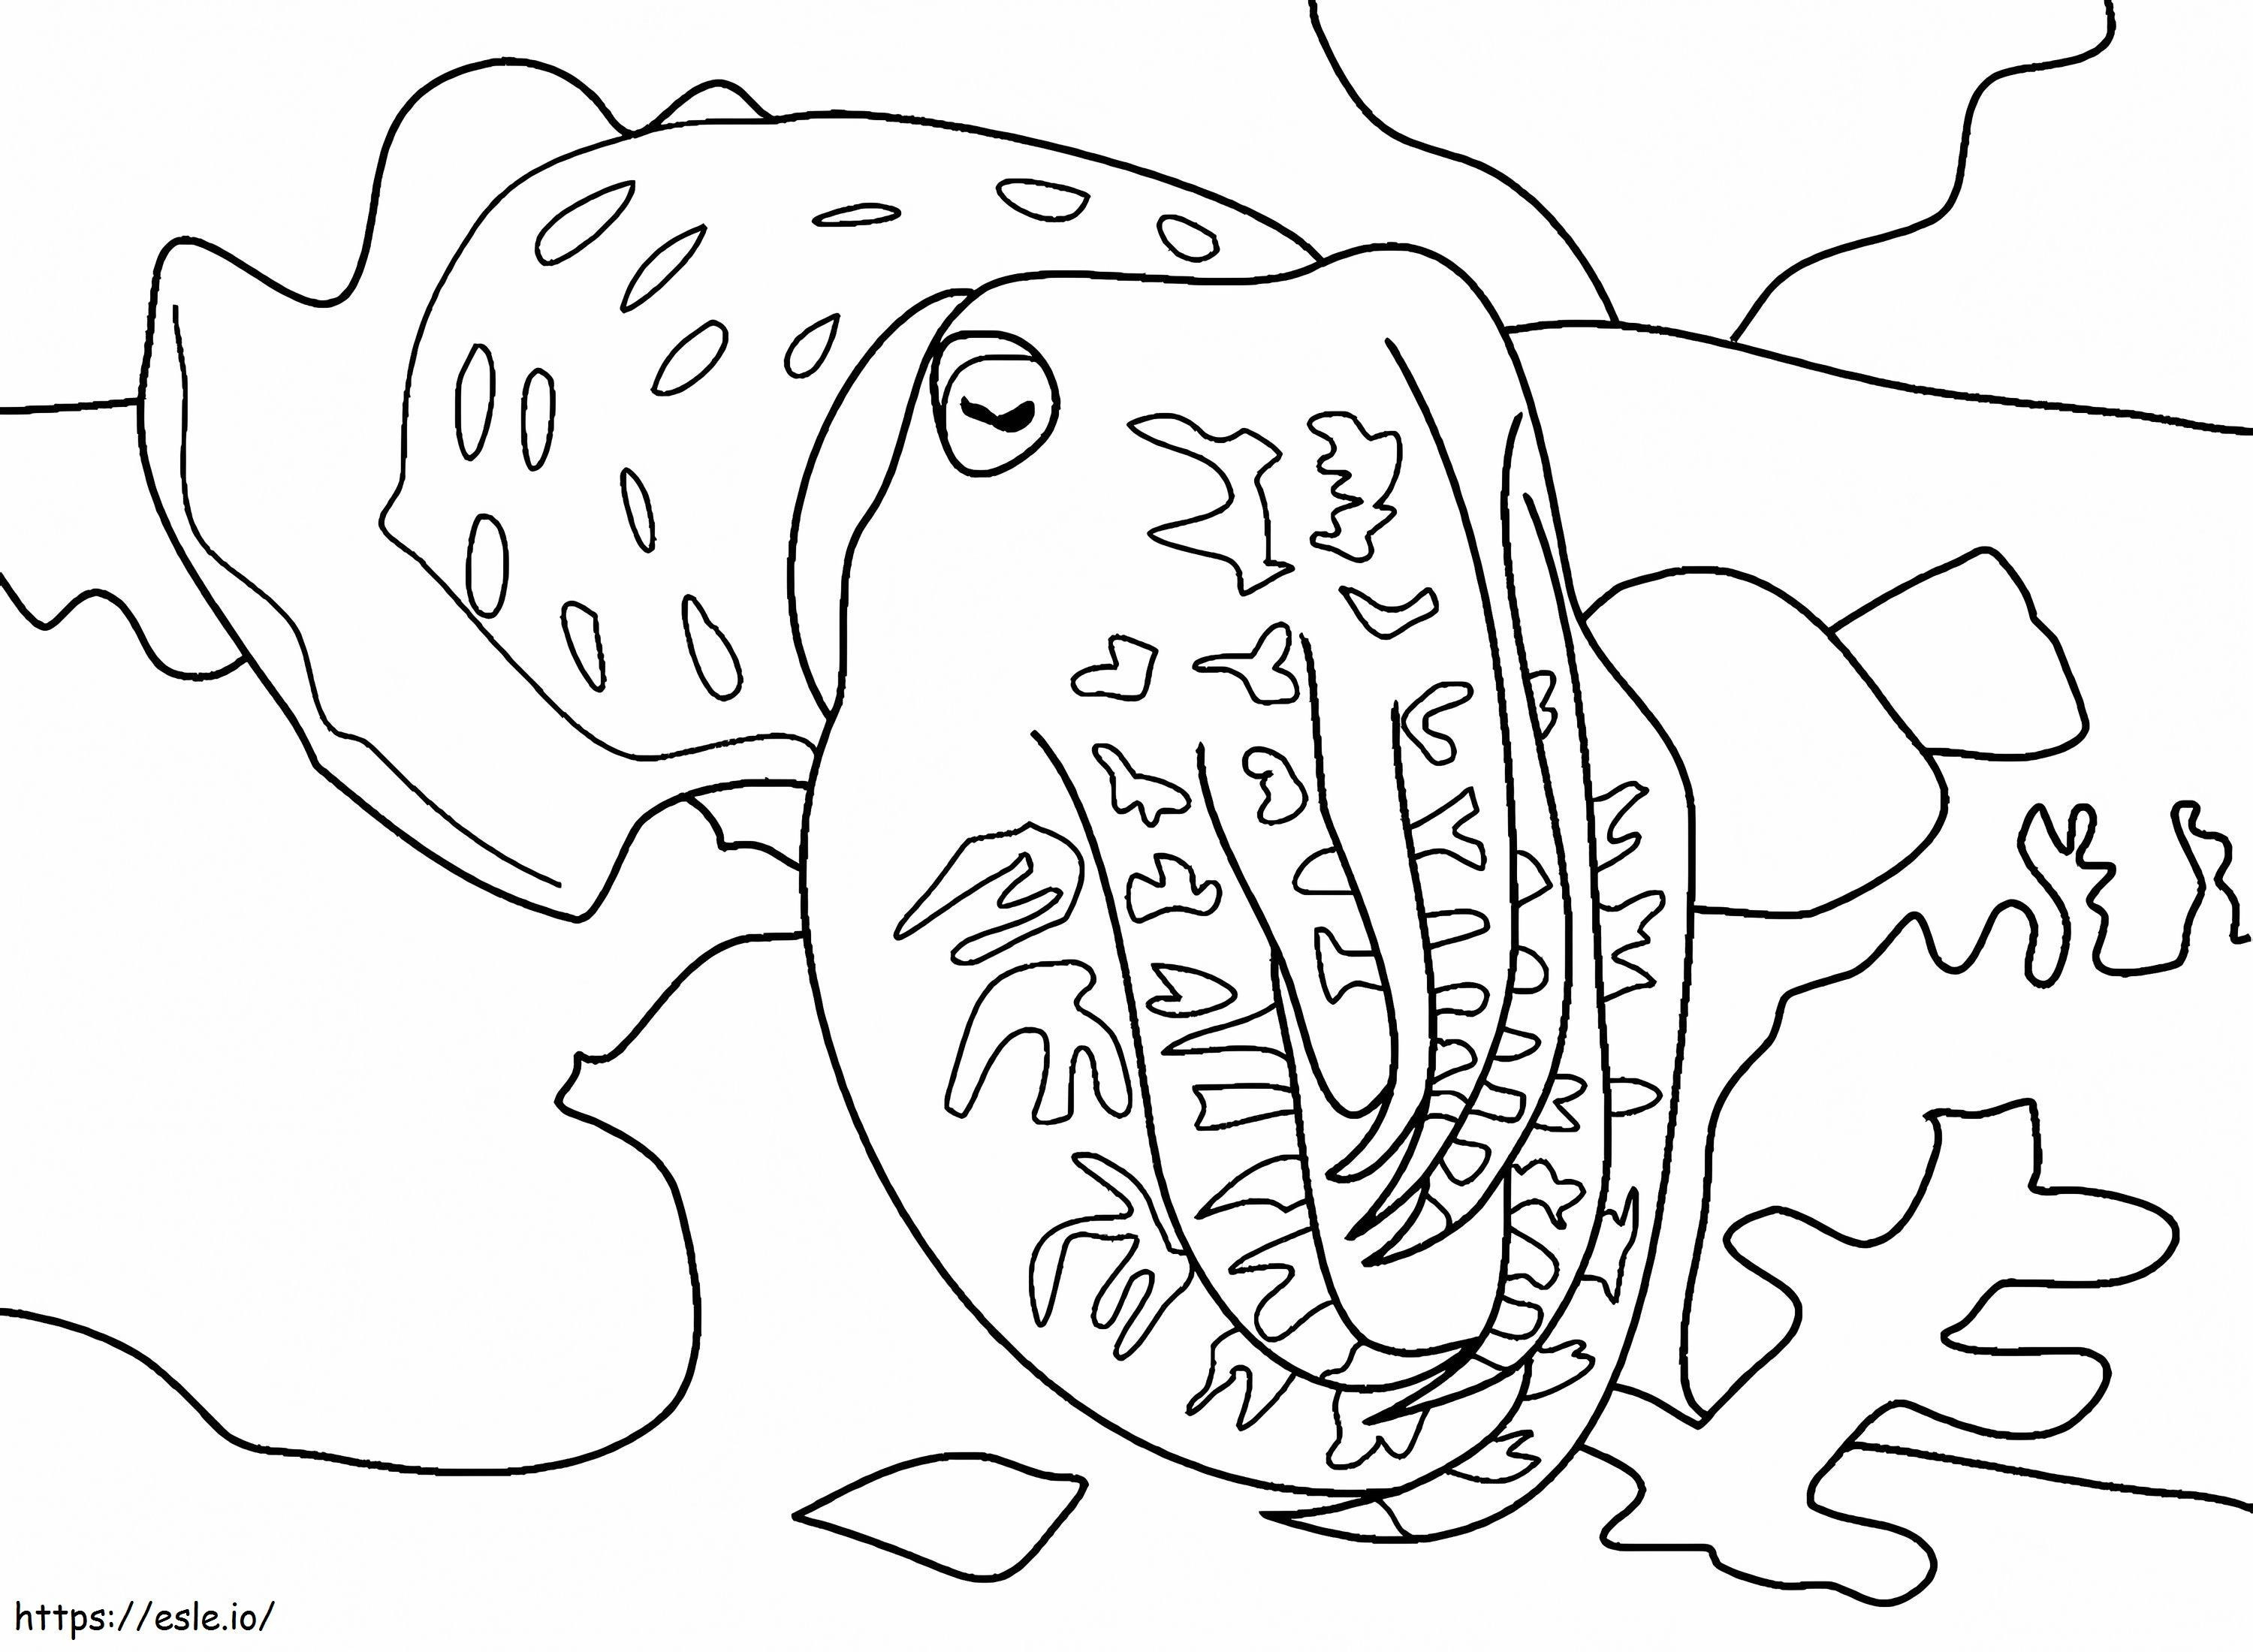 1528690174 Cuttlefisha4 coloring page